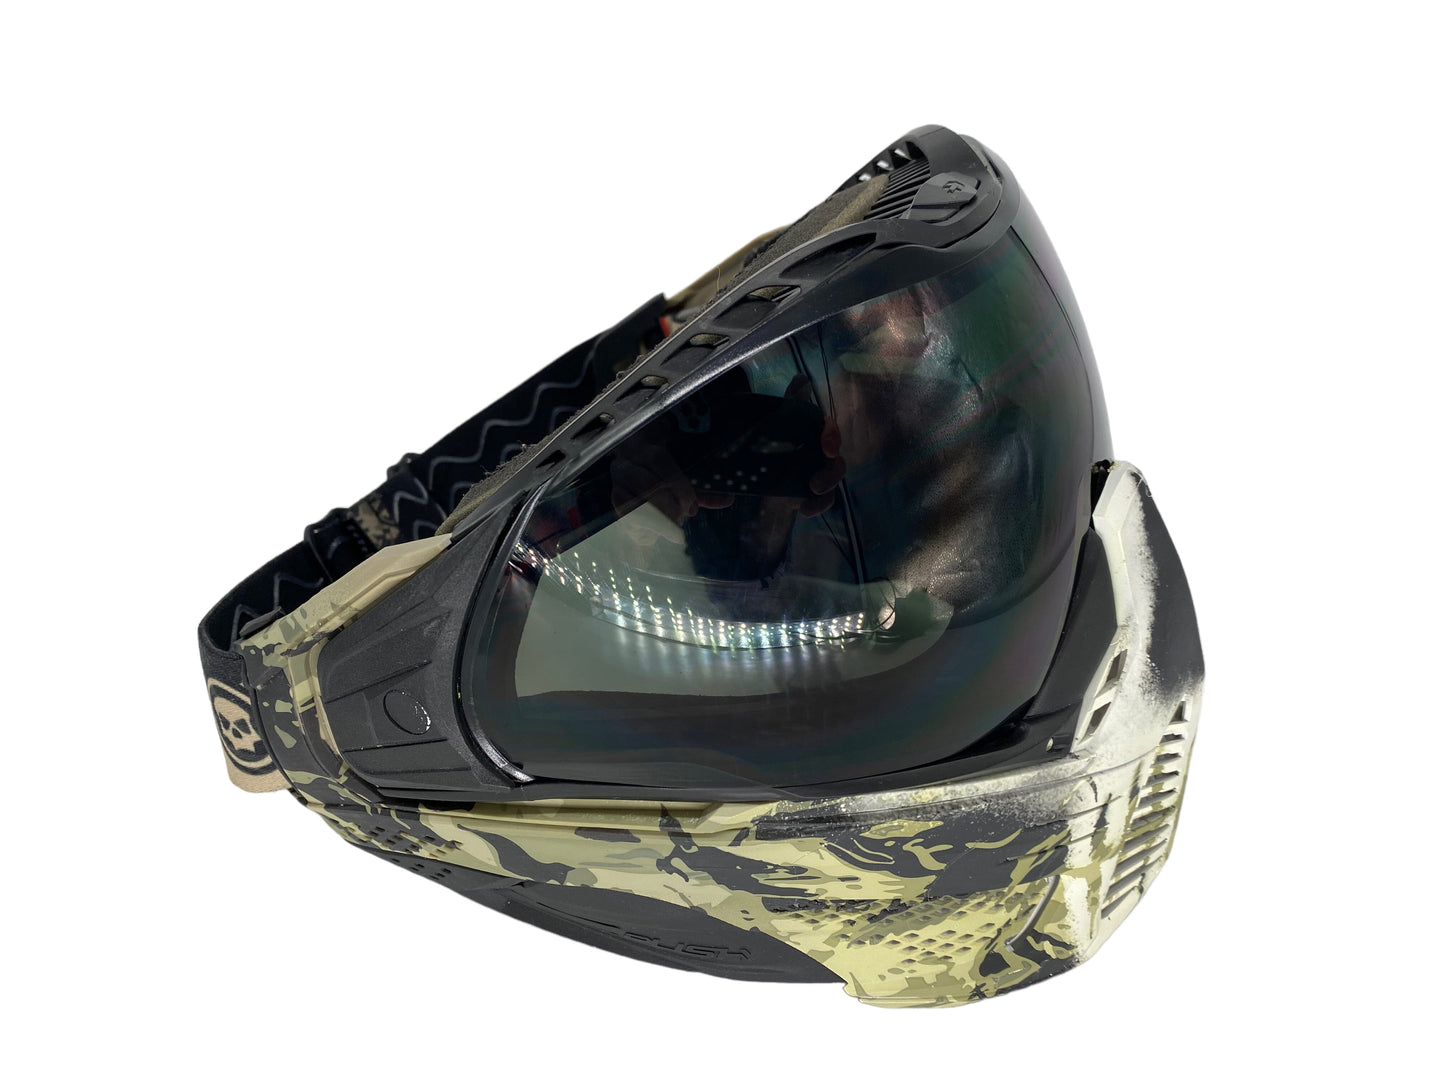 Used Push Paintball Goggle Mask Skull Camo Paintball Gun from CPXBrosPaintball Buy/Sell/Trade Paintball Markers, Paintball Hoppers, Paintball Masks, and Hormesis Headbands